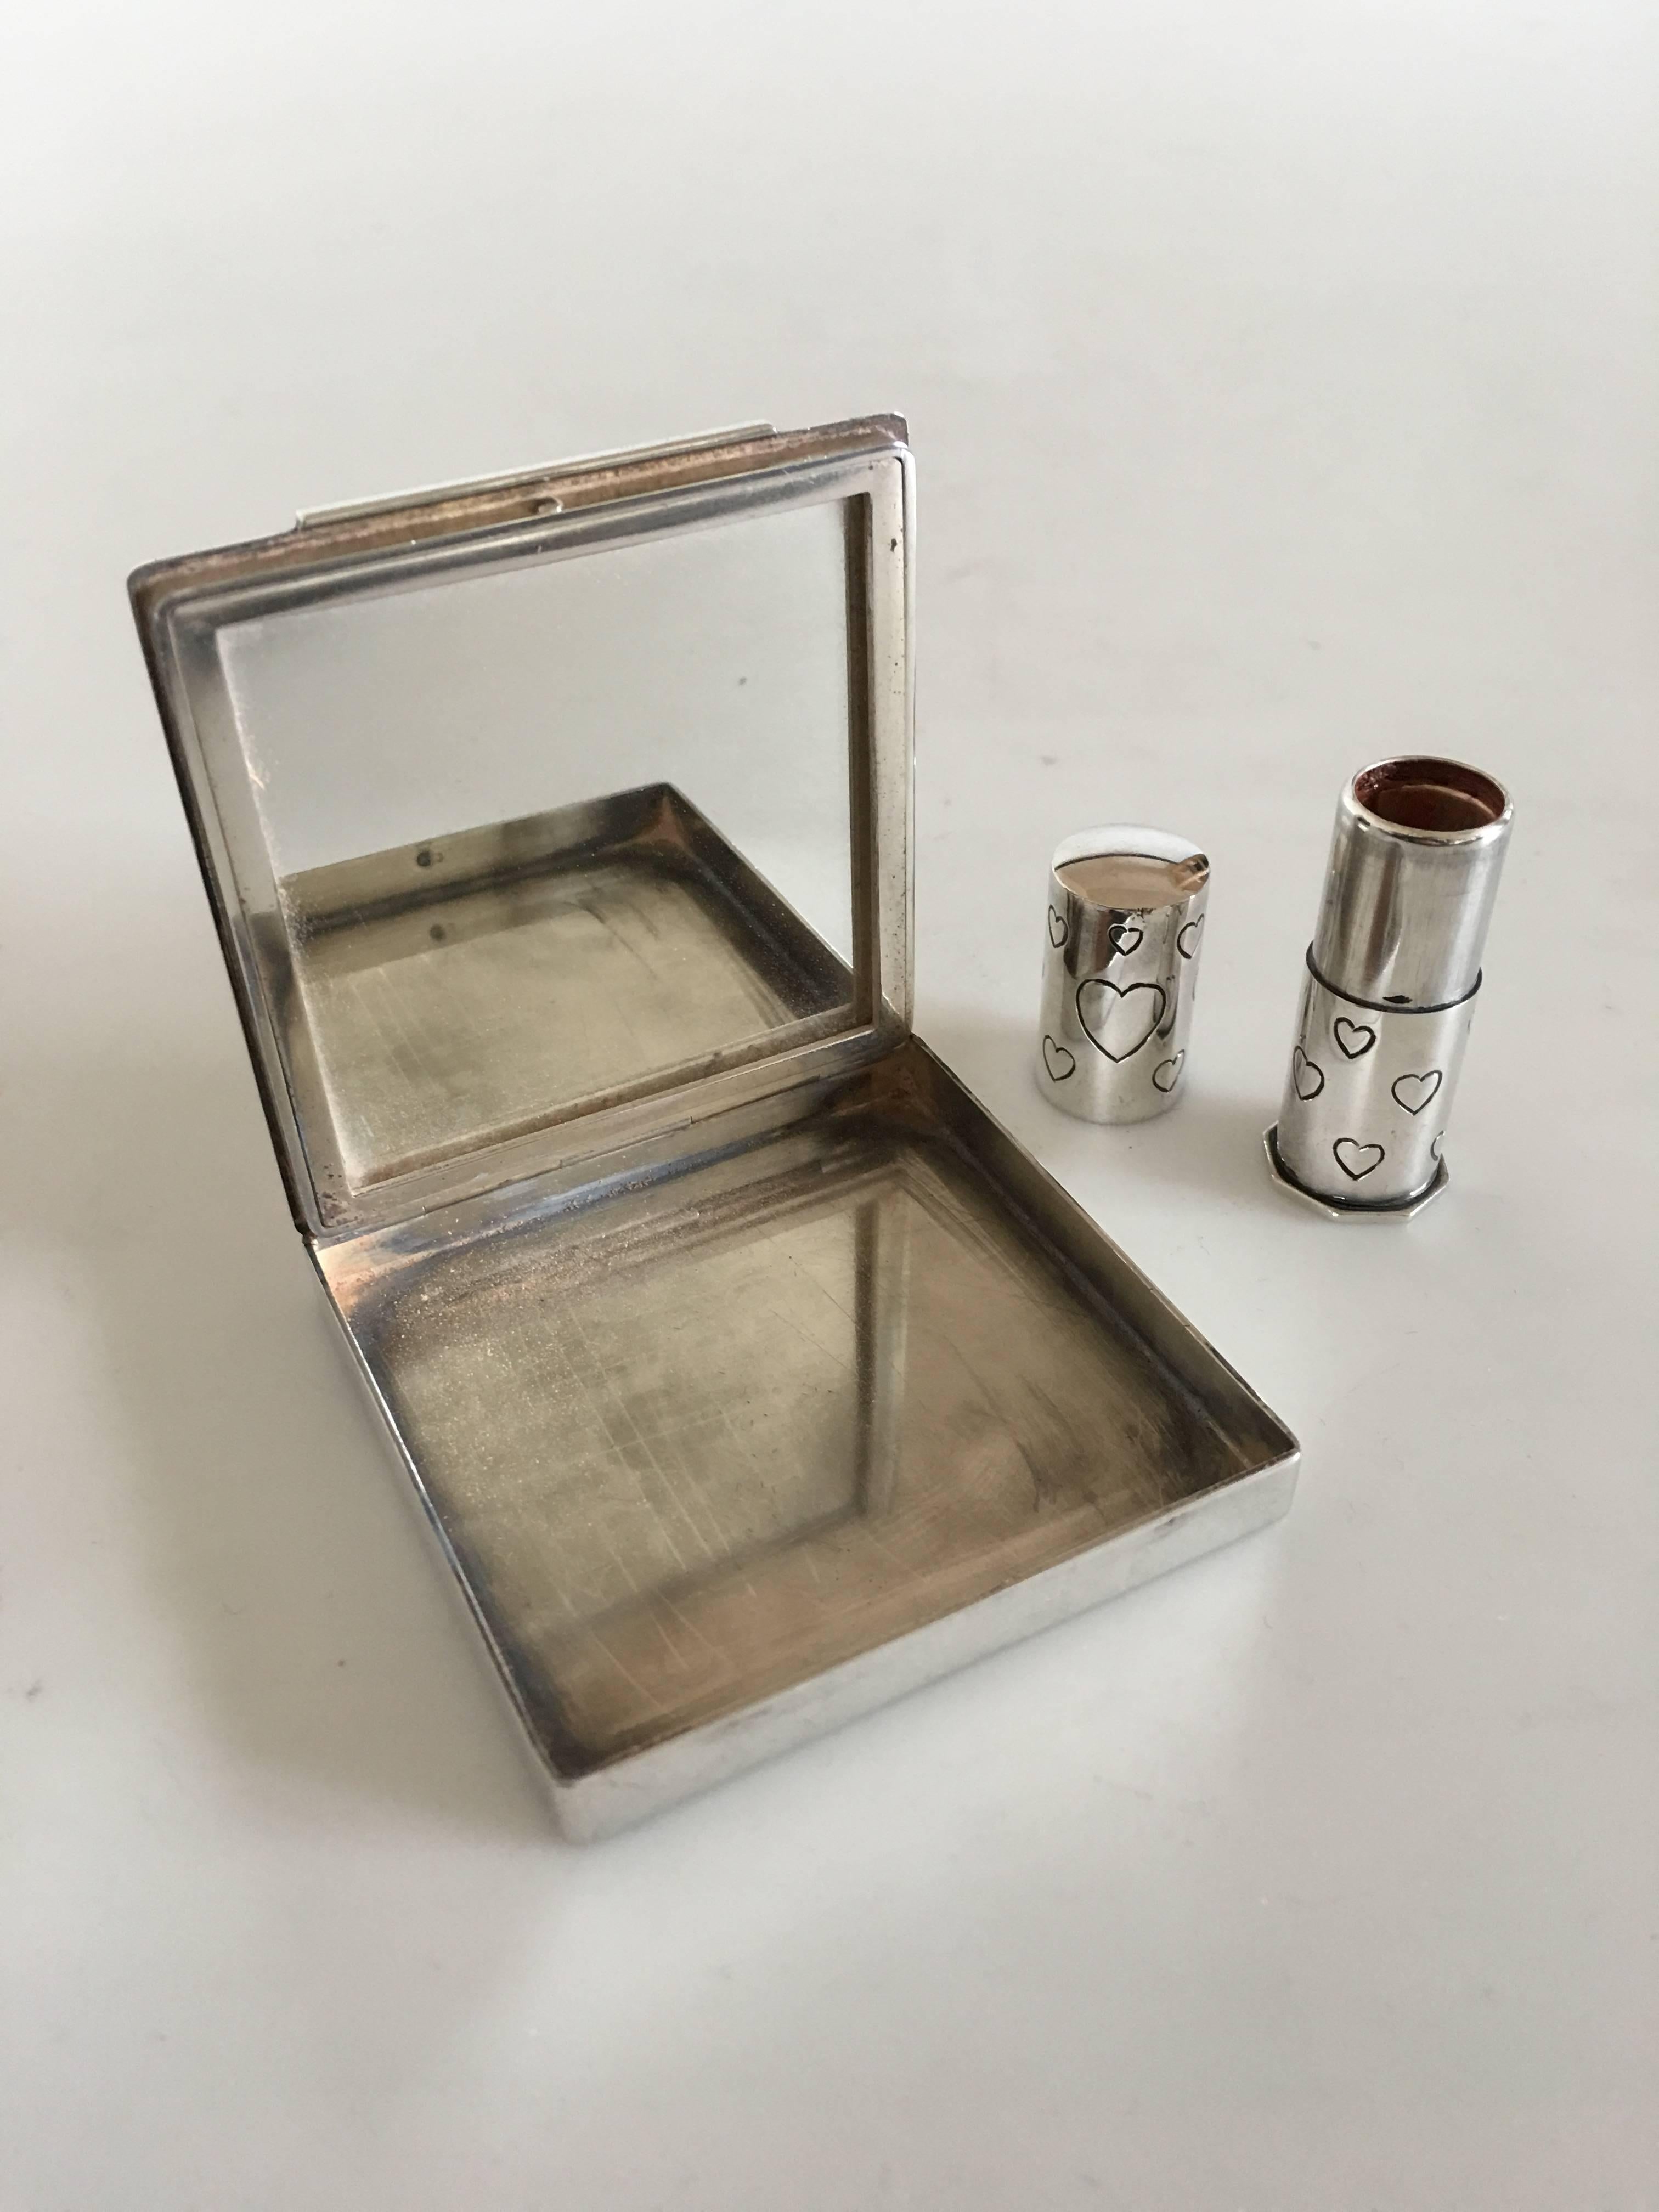 Danish Powder and Mirror Case and Lipstick Case in Silver Ornamented with Hearts